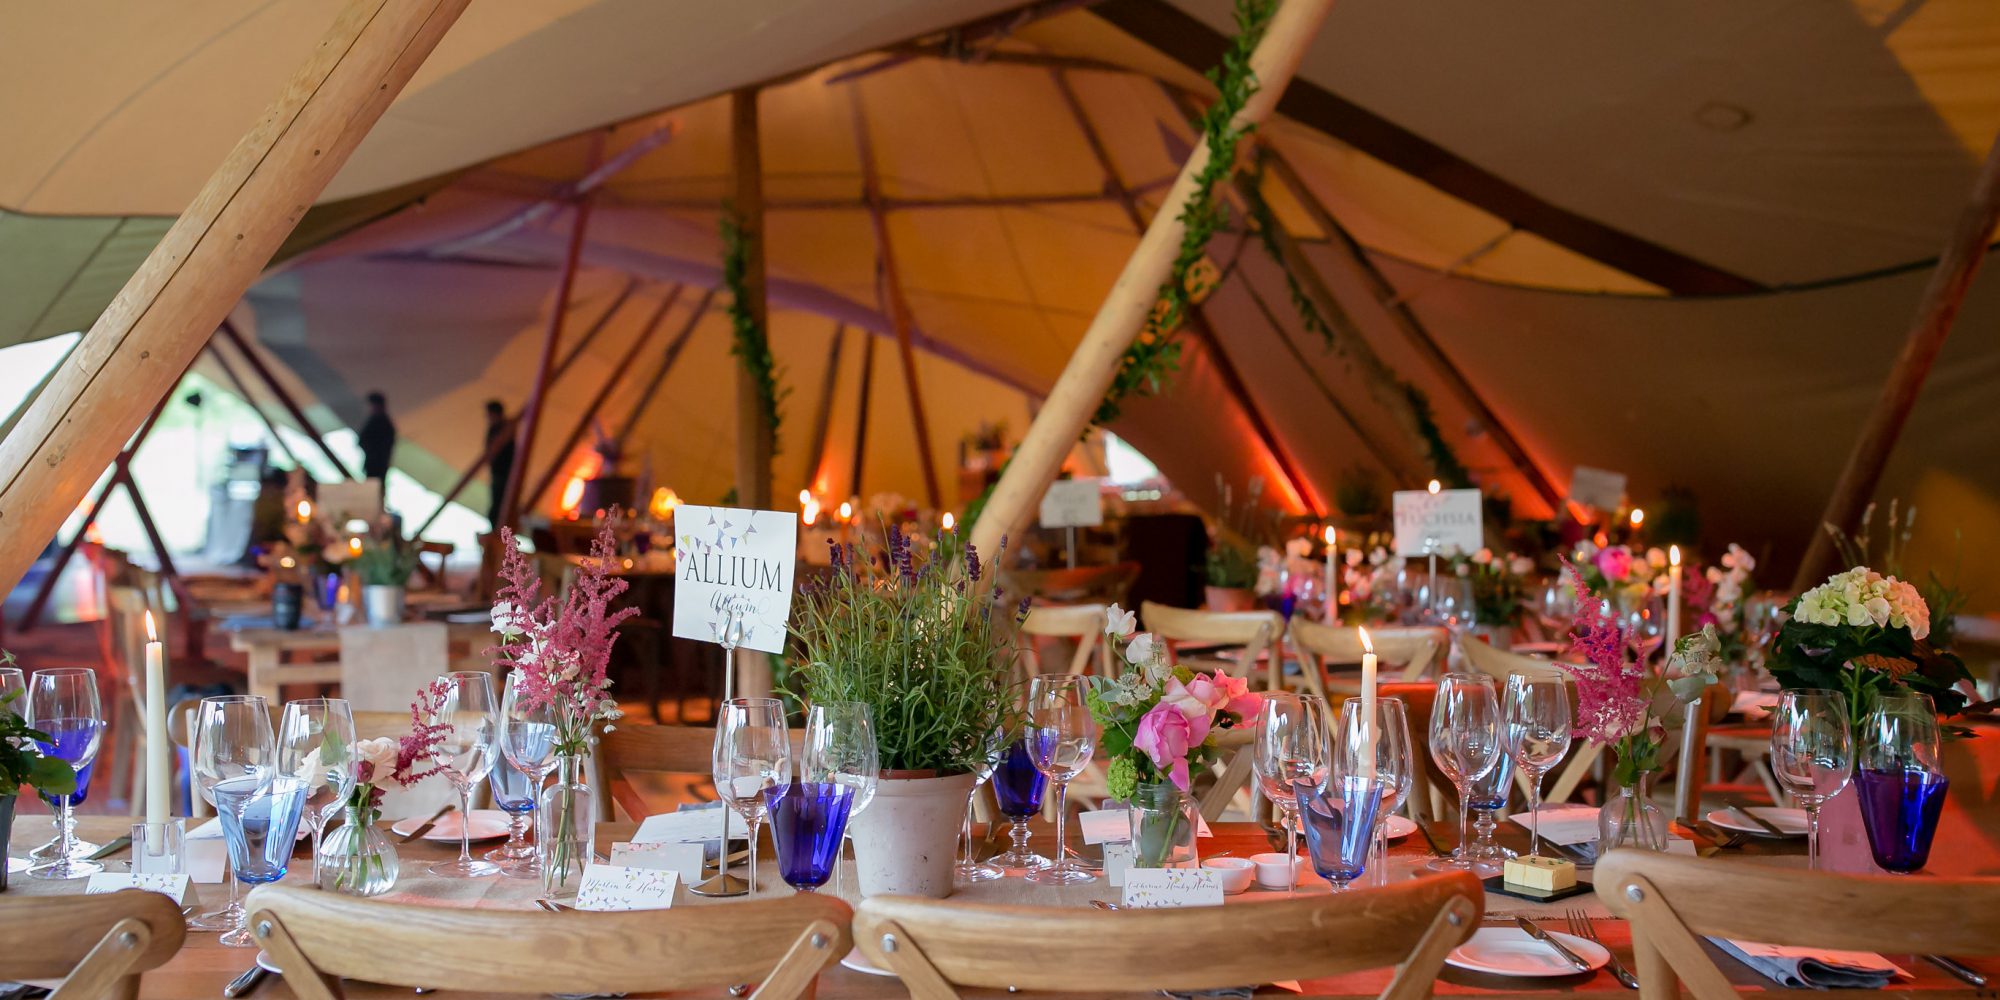 Wedding planner, event planner, and party planner based in London & Herts